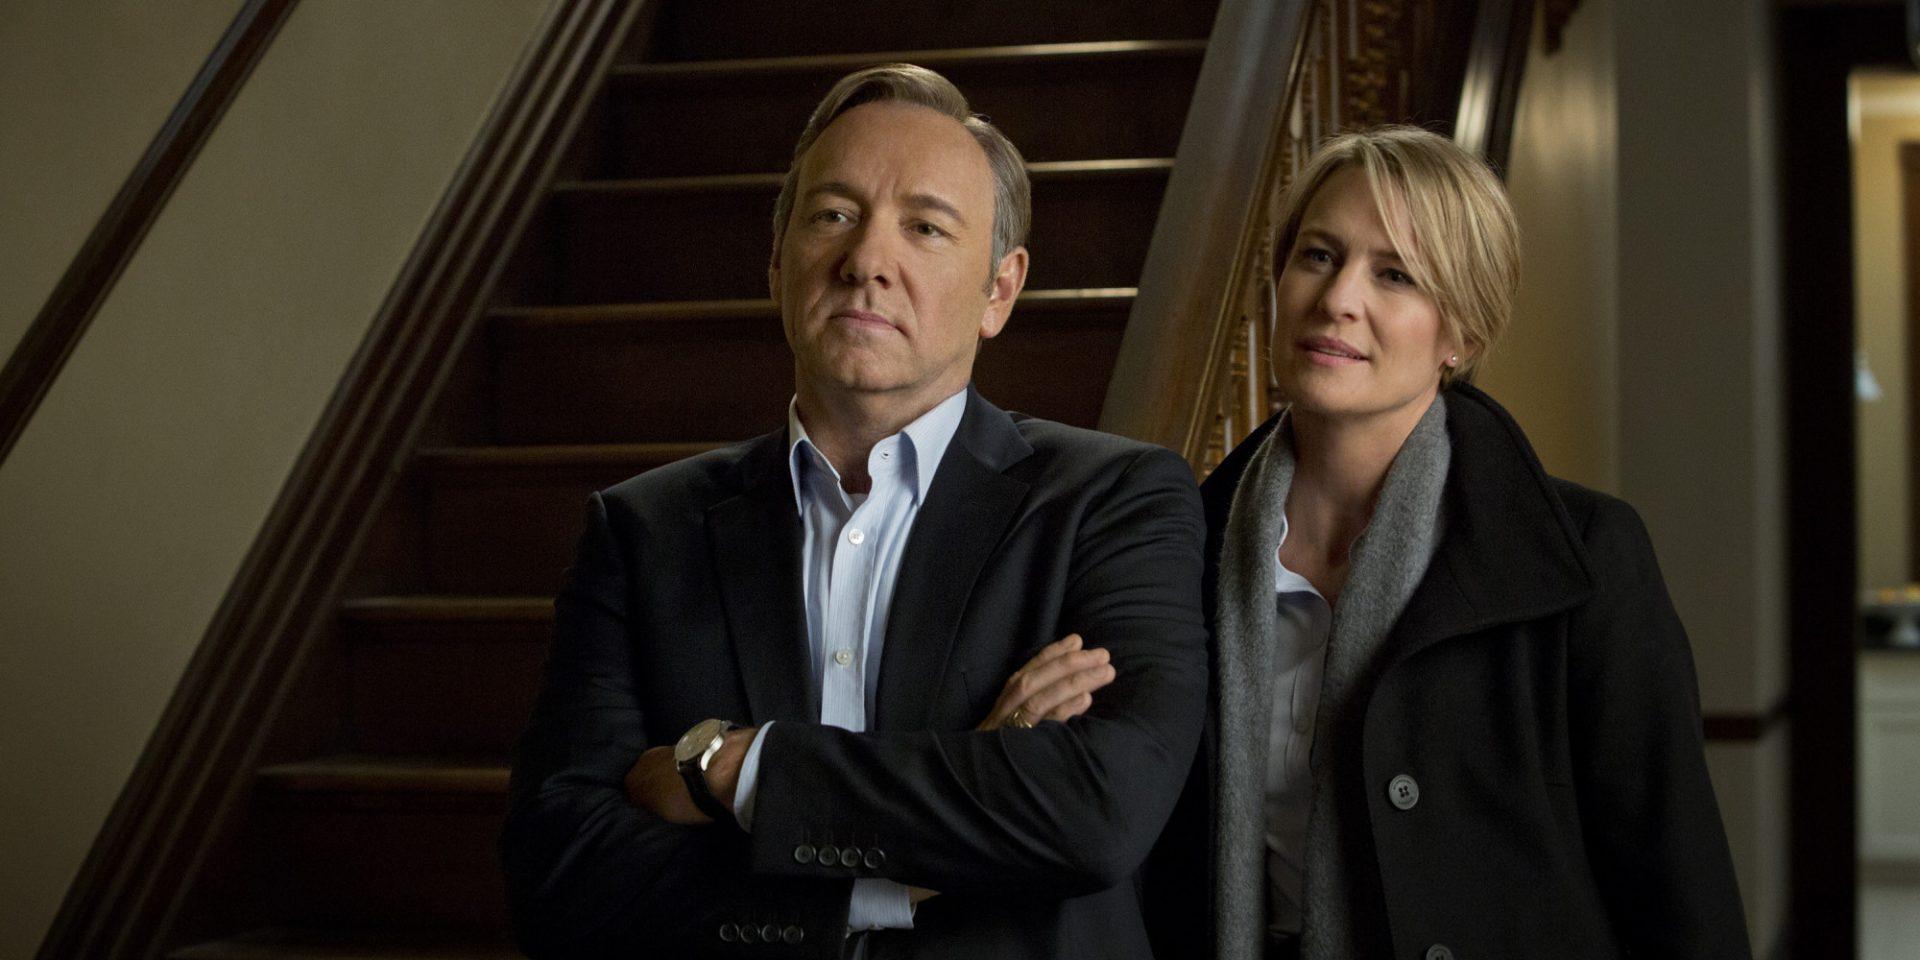 Photo courtesy of Netflix / Kevin Spacey (left) stars as ruthless politician Frank Underwood alongside Robin Wright (right) as his wife, Claire in the Netflix series House of Cards. 